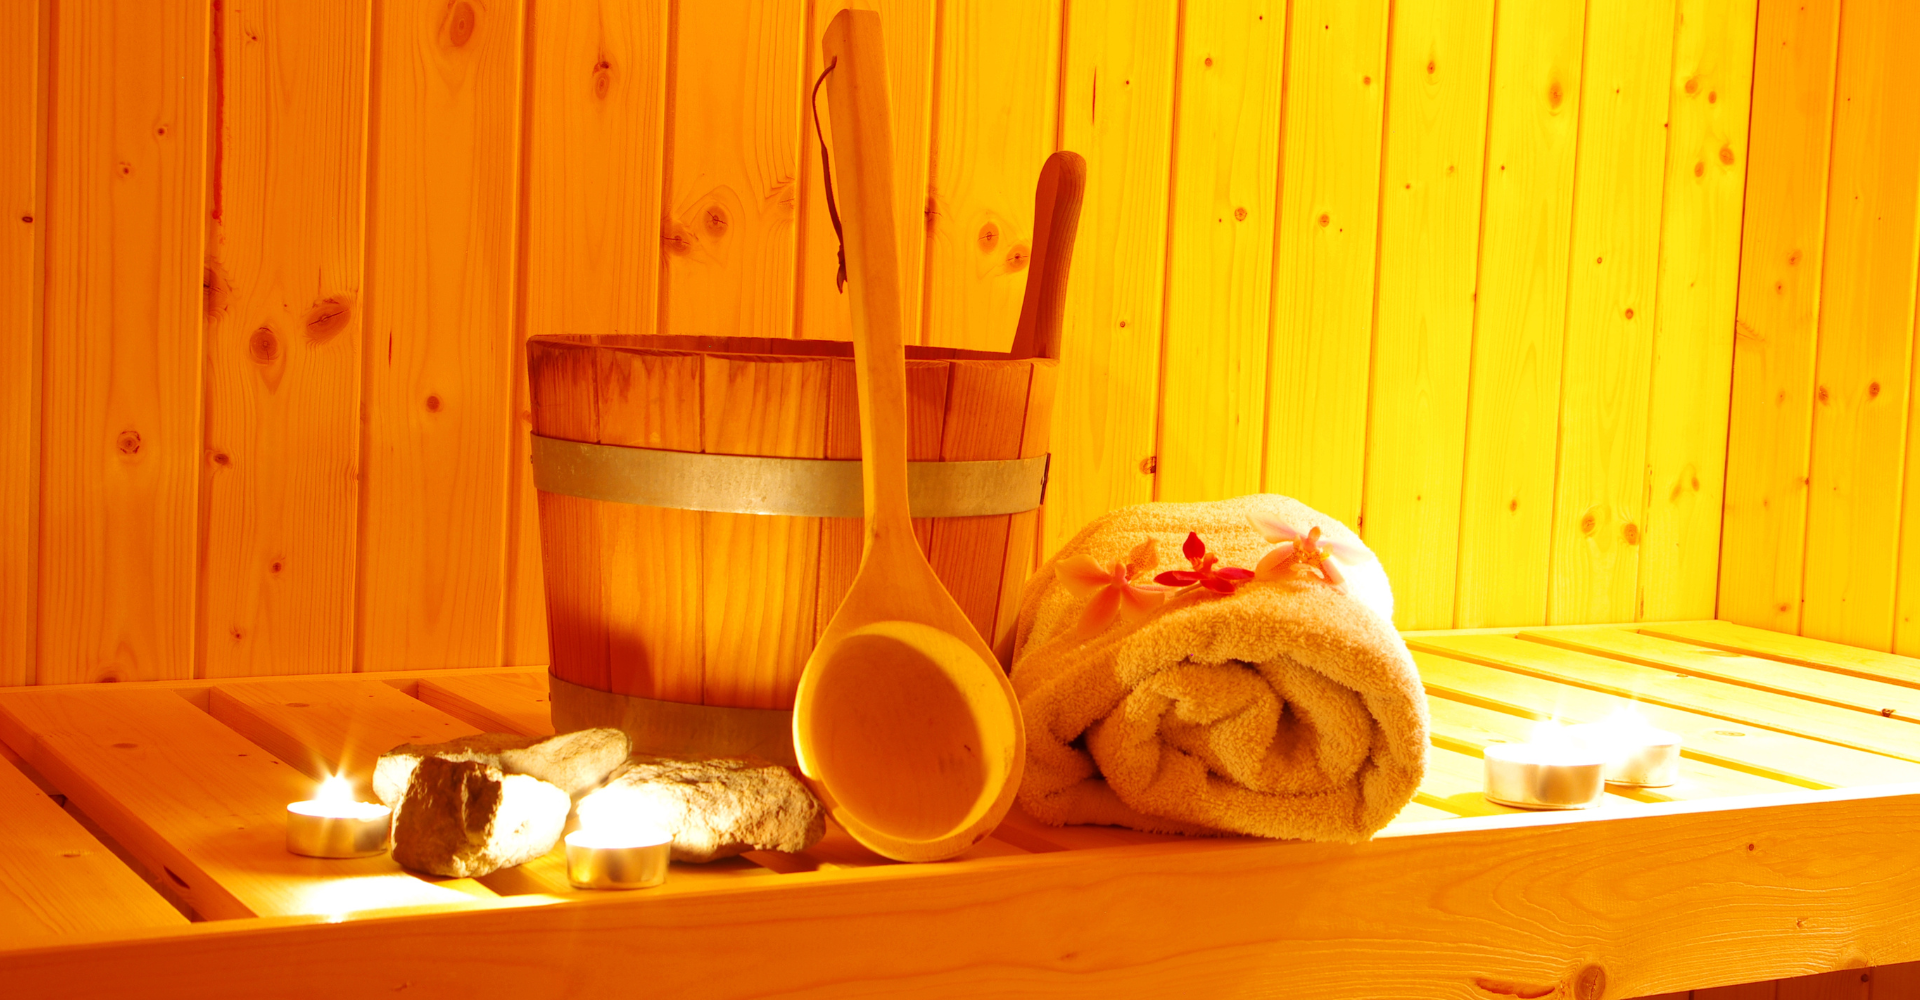 Finnish Saunas: How They Work and Their Health Benefits